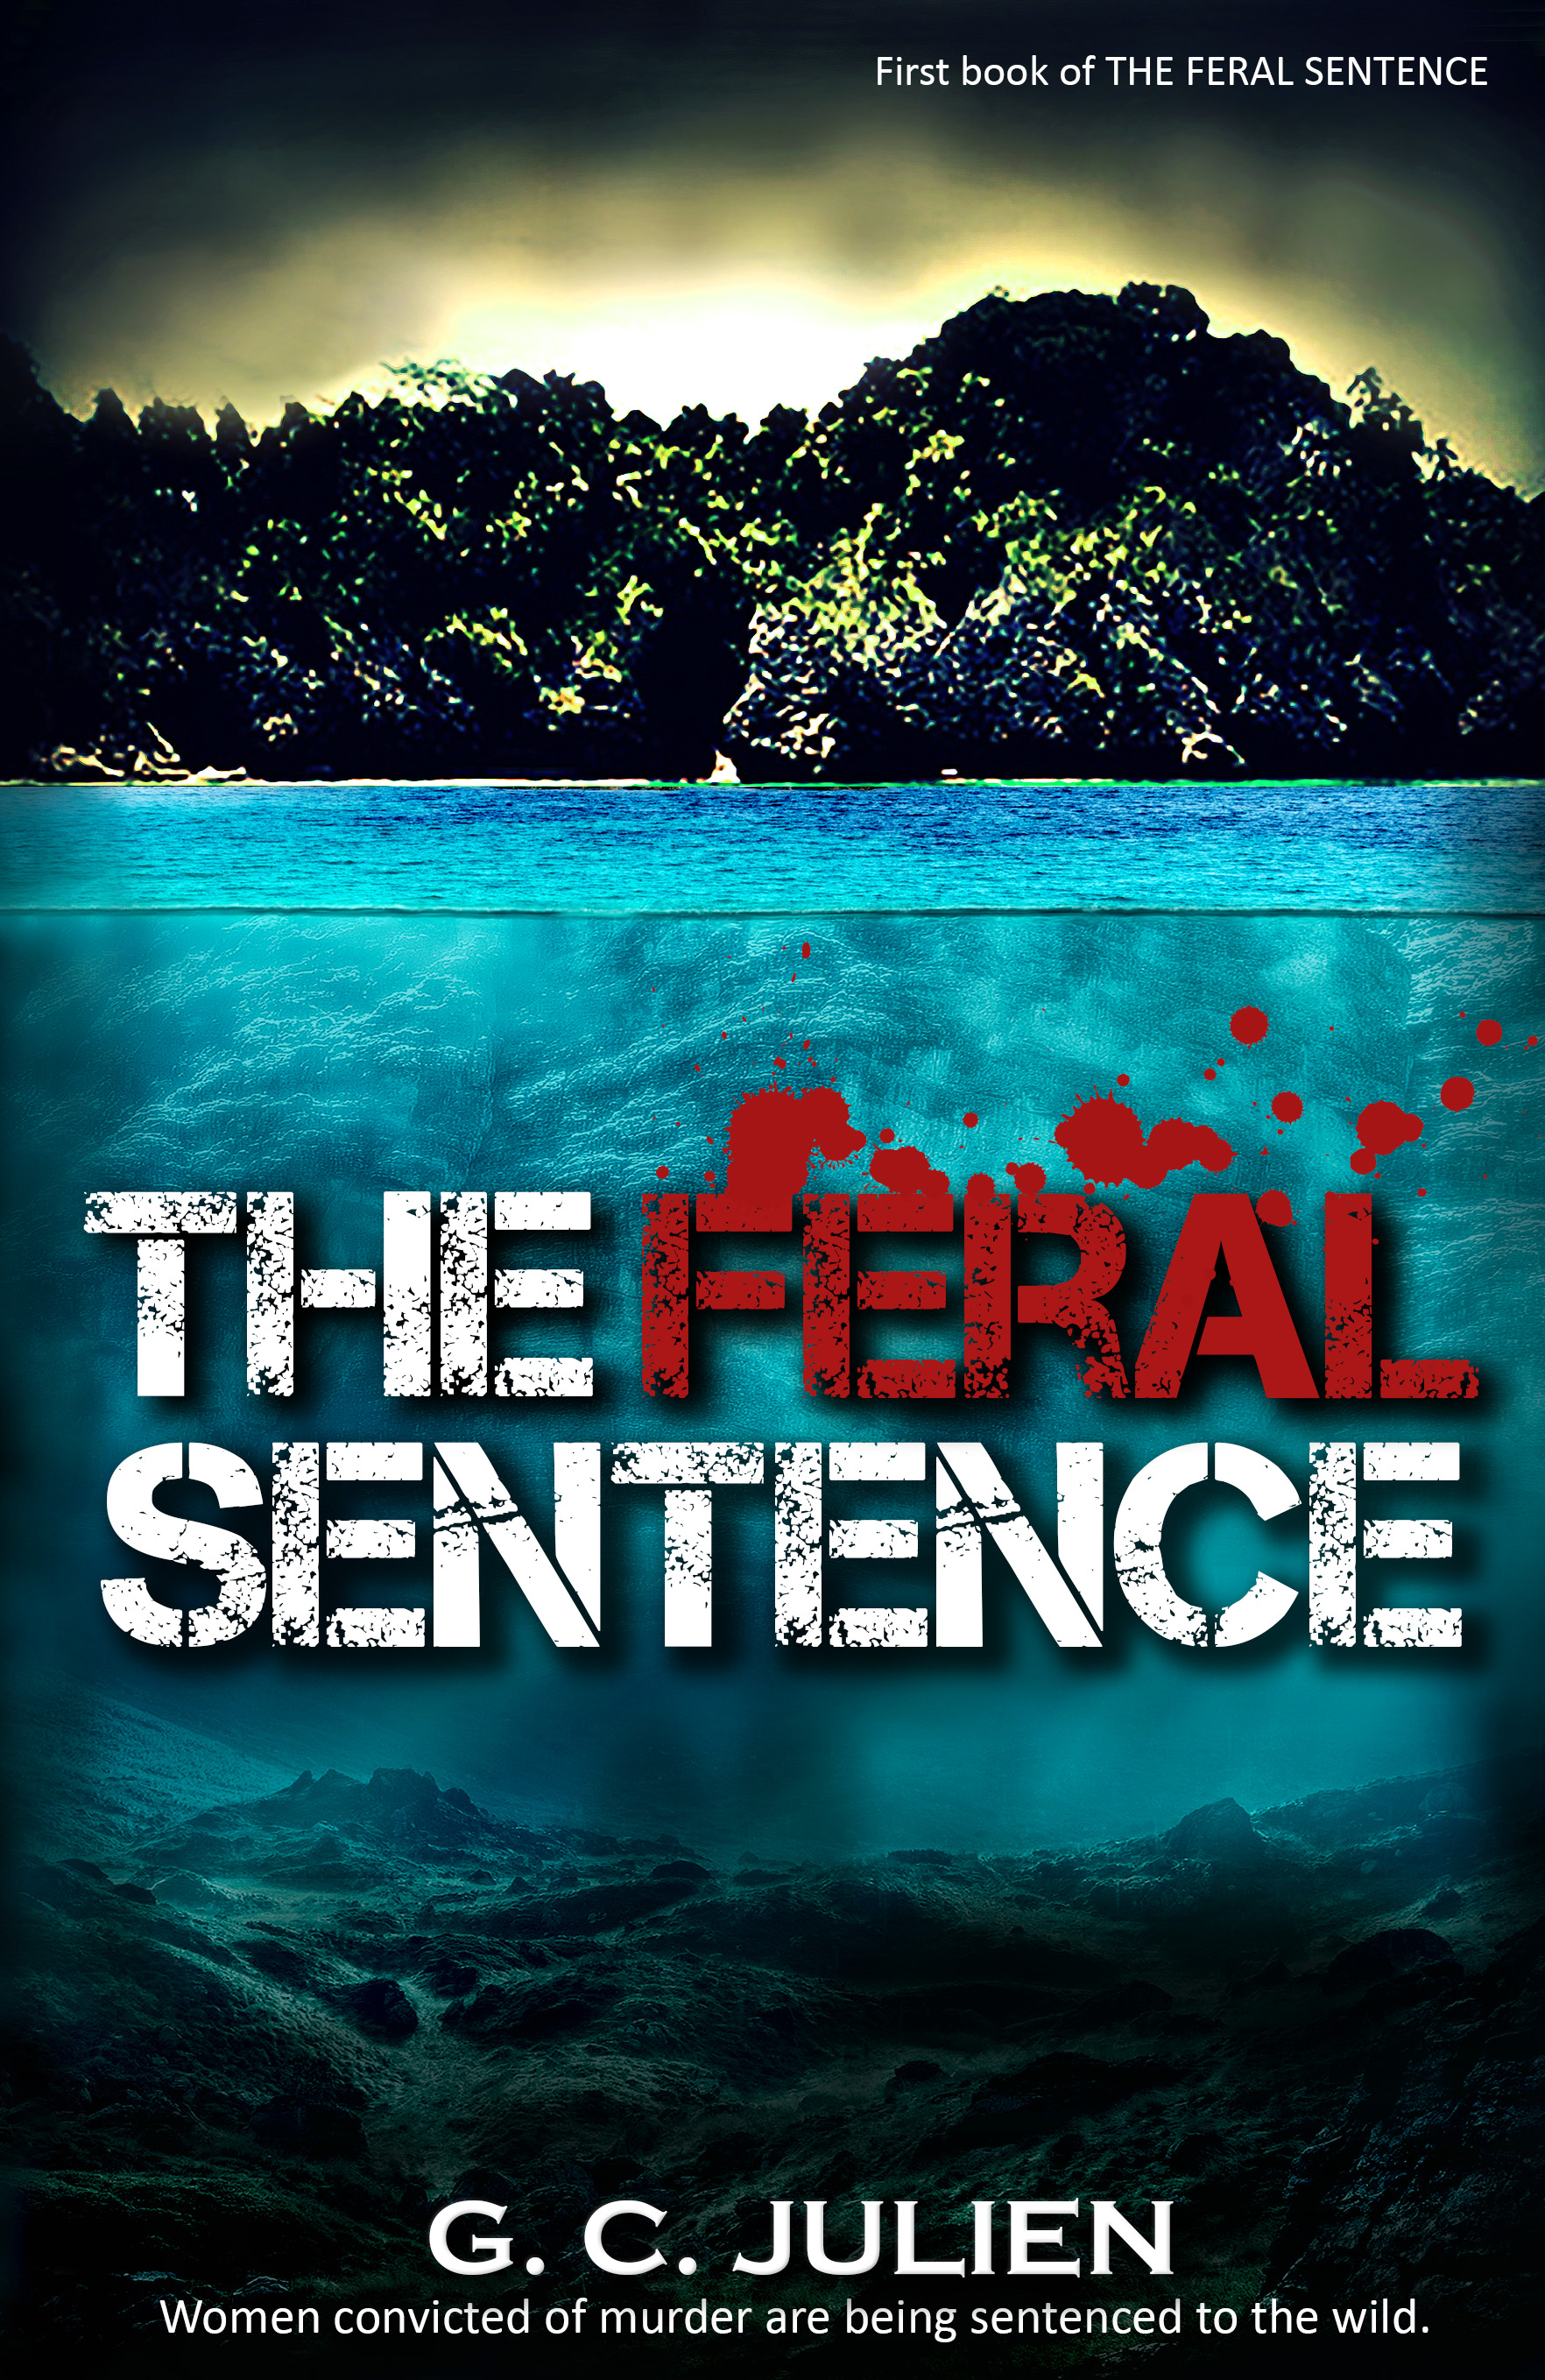 FREE: The Feral Sentence by G. C. Julien